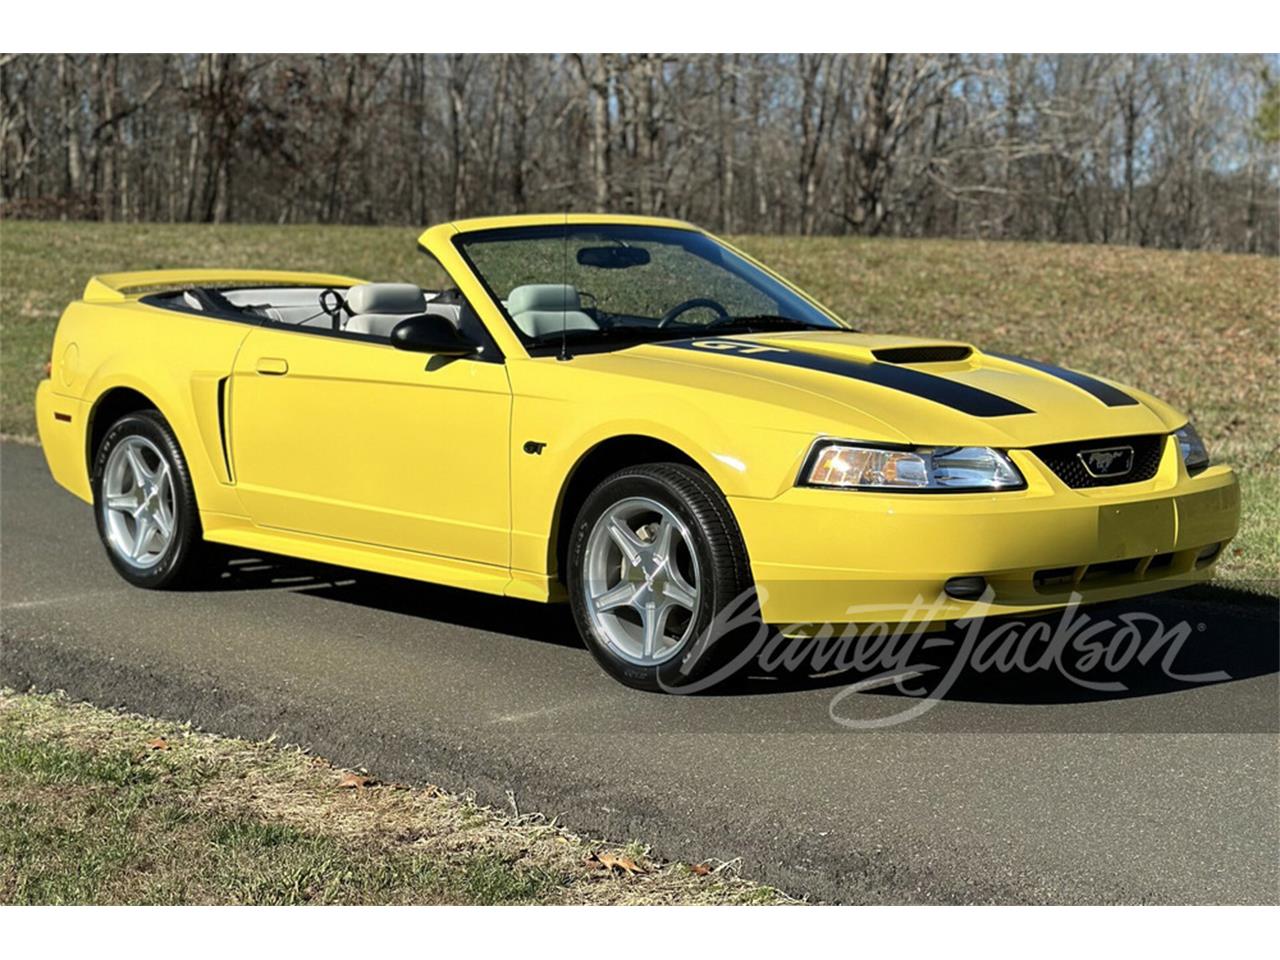 For Sale at Auction: 2000 Ford Mustang GT in Scottsdale, Arizona for sale in Scottsdale, AZ